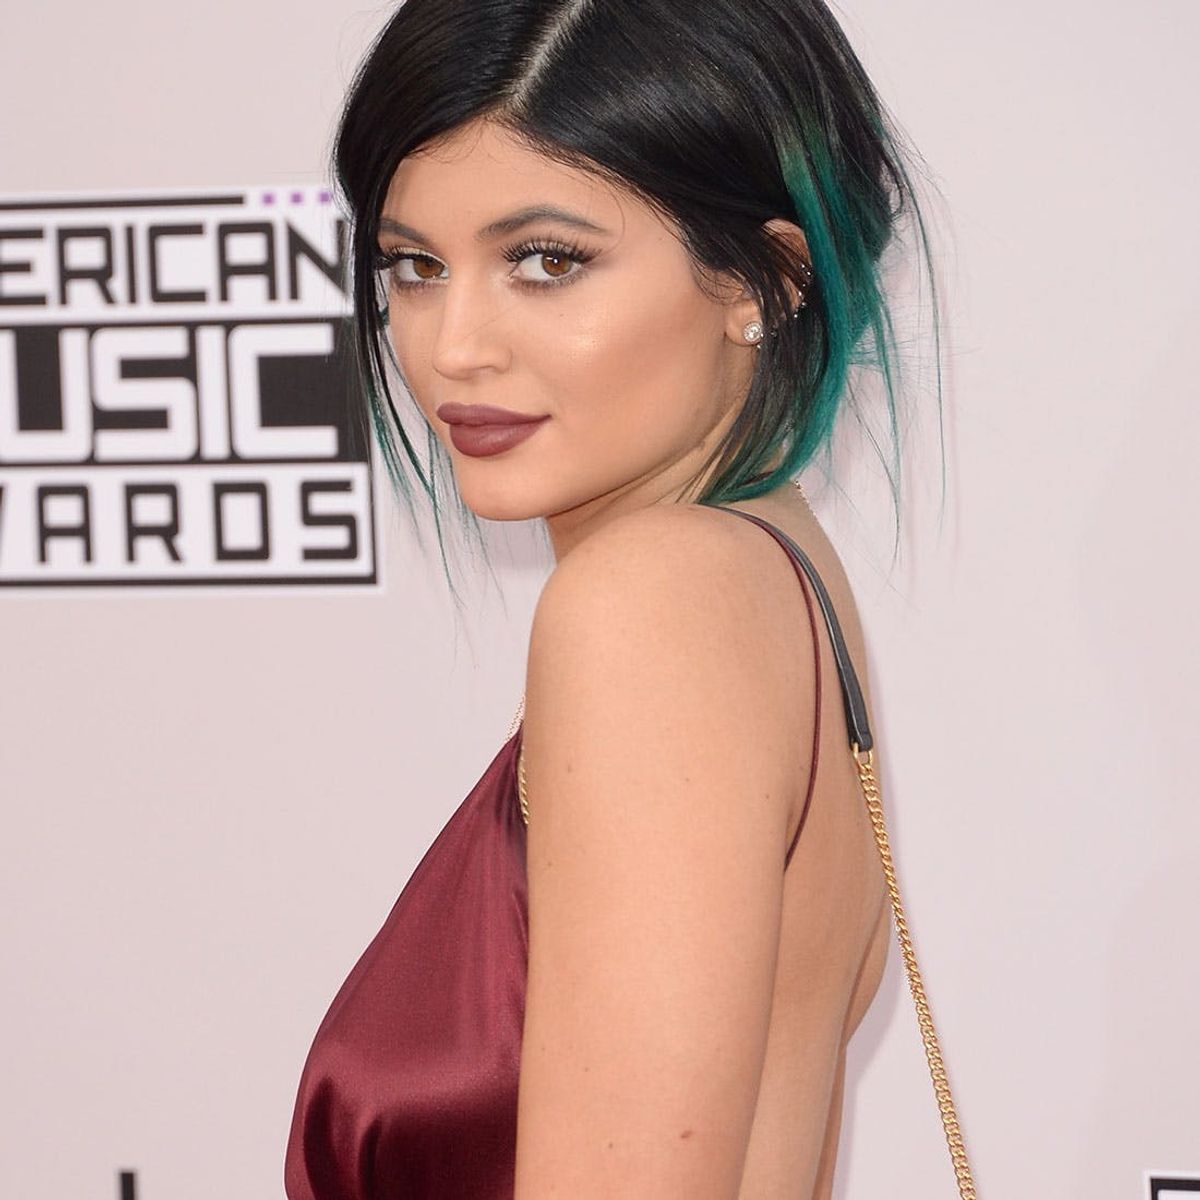 How You Can Own Kylie Jenner’s Clothes AND Donate to a Good Cause